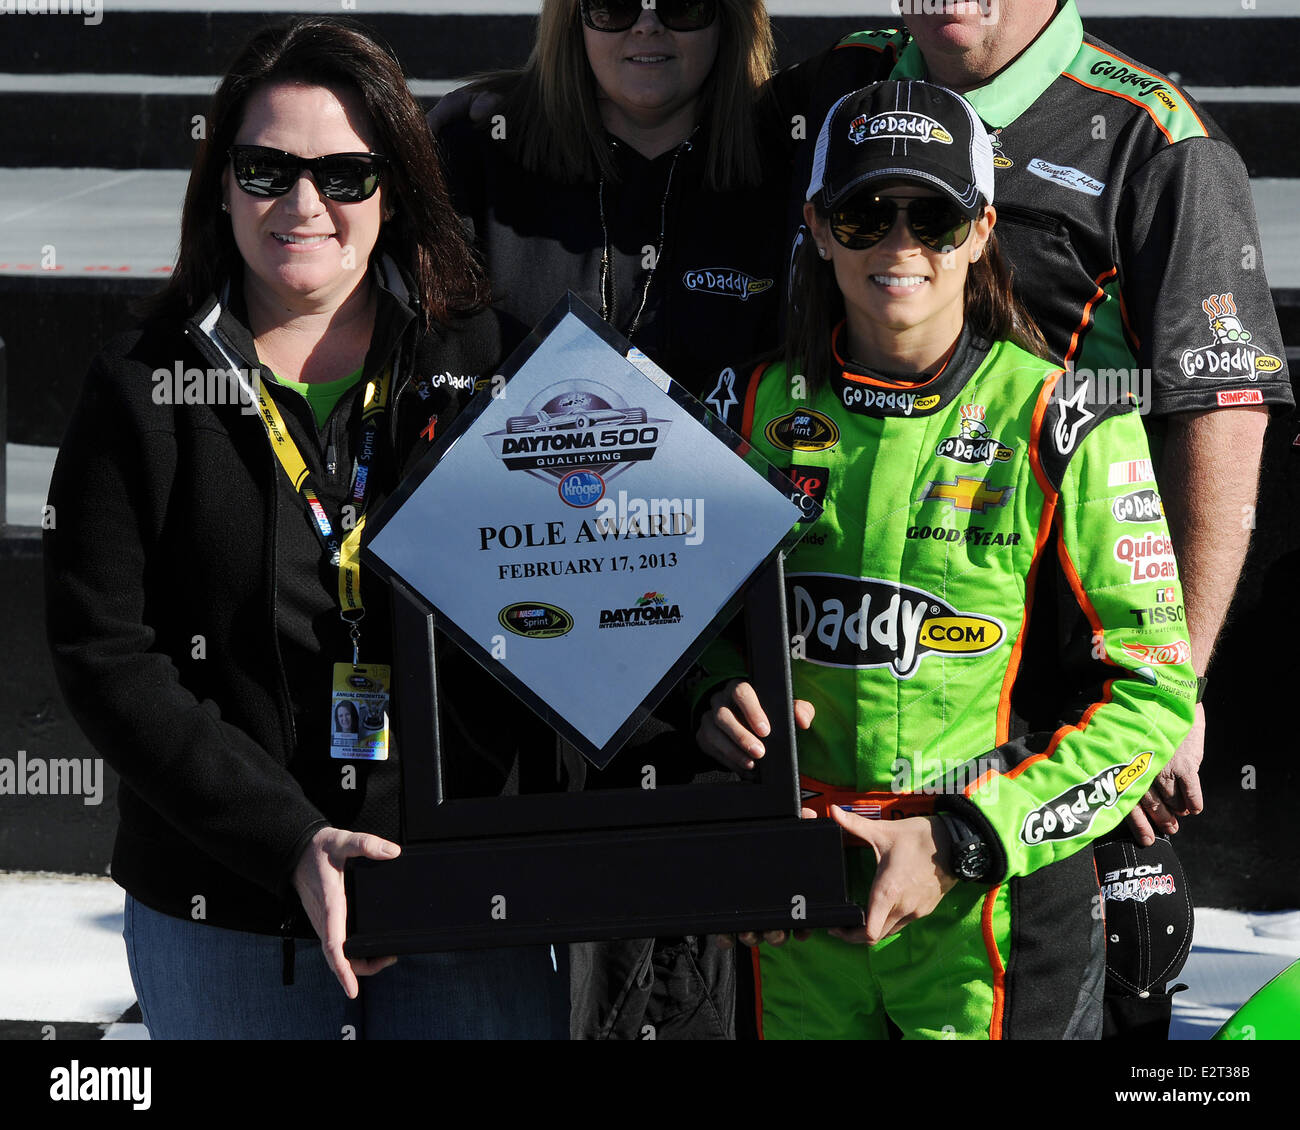 Danica Patrick poses after becoming the first women in NASCAR history to win the pole award for the NASCAR Sprint Cup Series Daytona 500 at Daytona International Speedway  Featuring: Danica Patrick Where: Daytona Beach,  Florida, United States When: 17 Fe Stock Photo